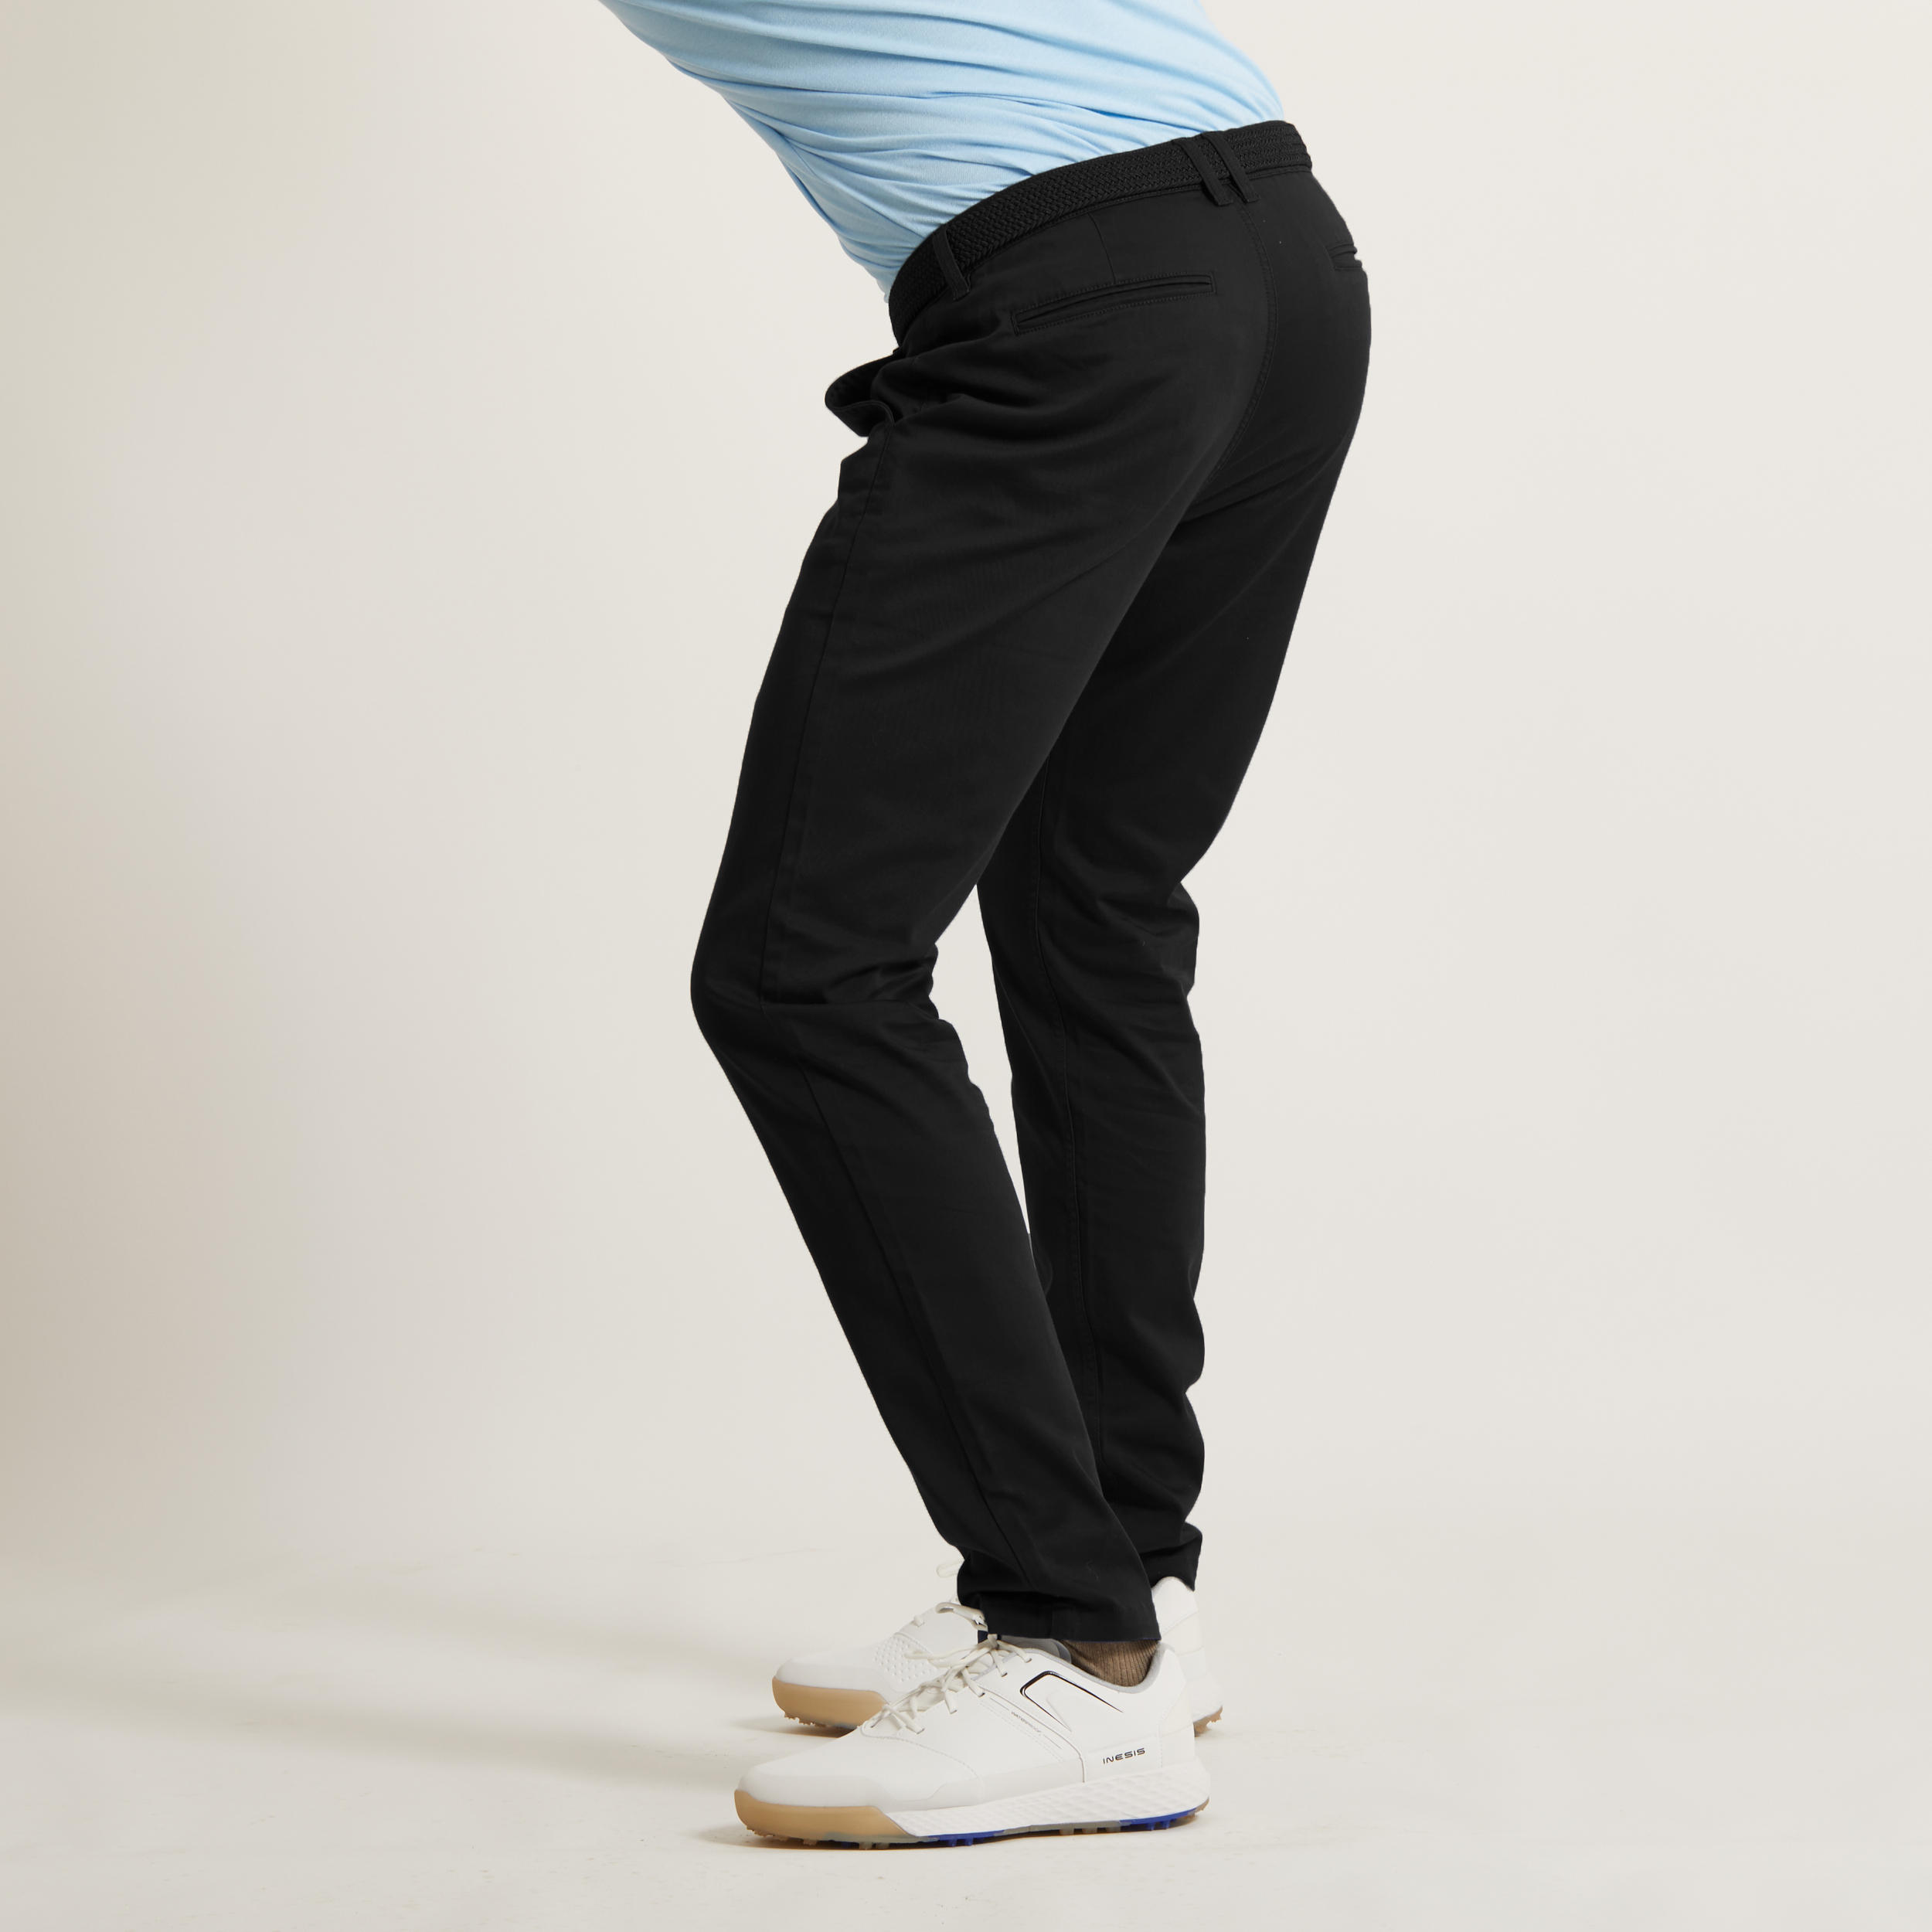 Inesis Men's Golf Winter Base Layer Review | Golf Monthly